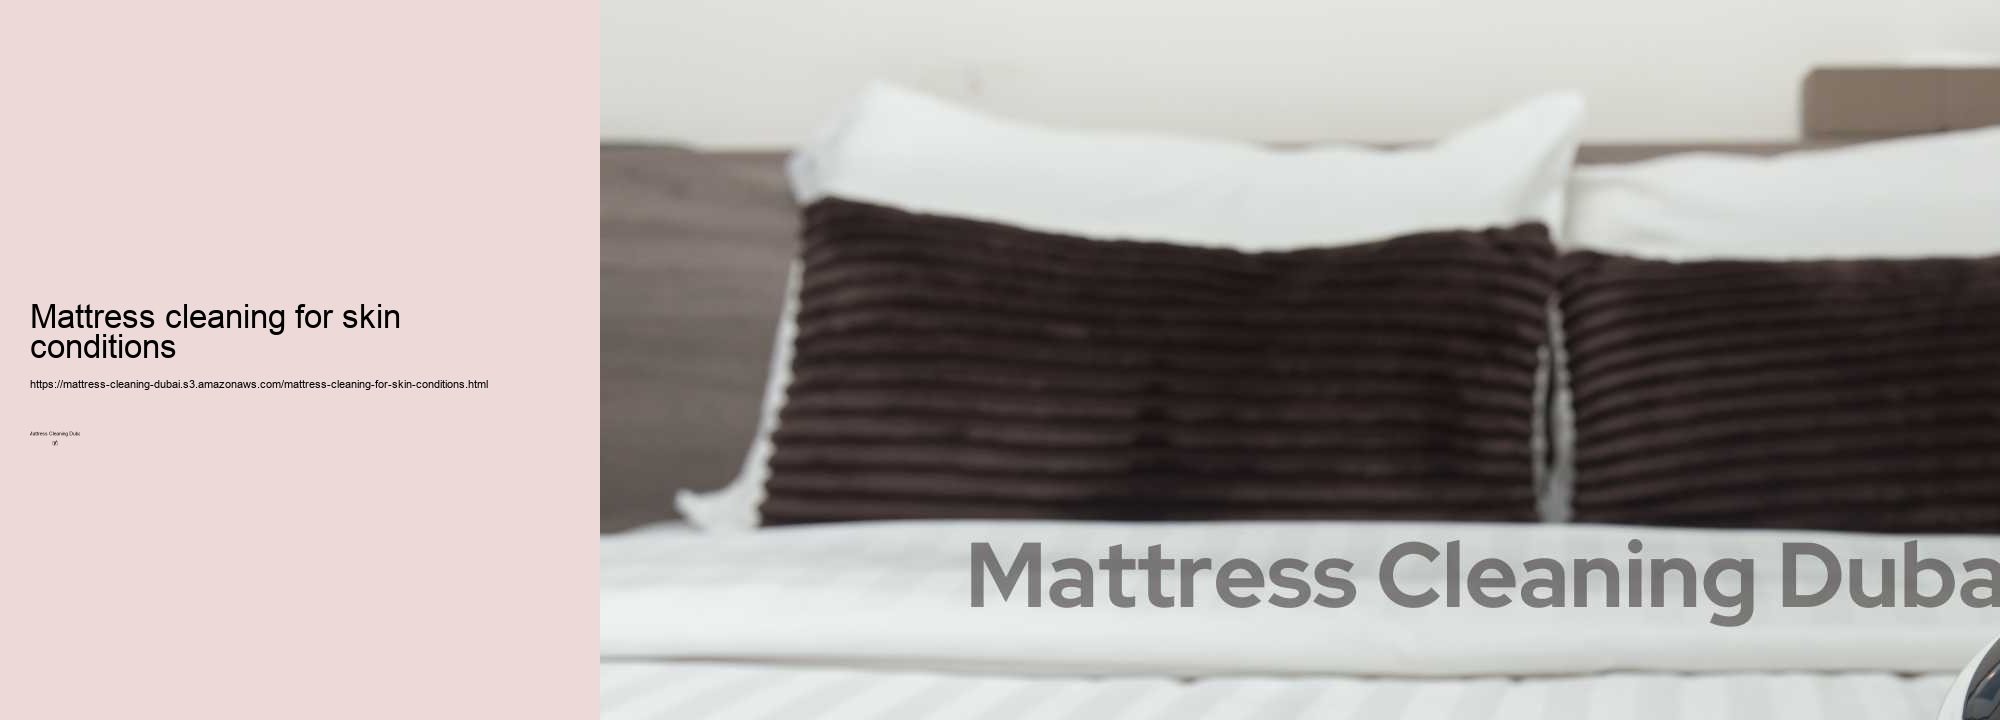 Mattress cleaning for skin conditions